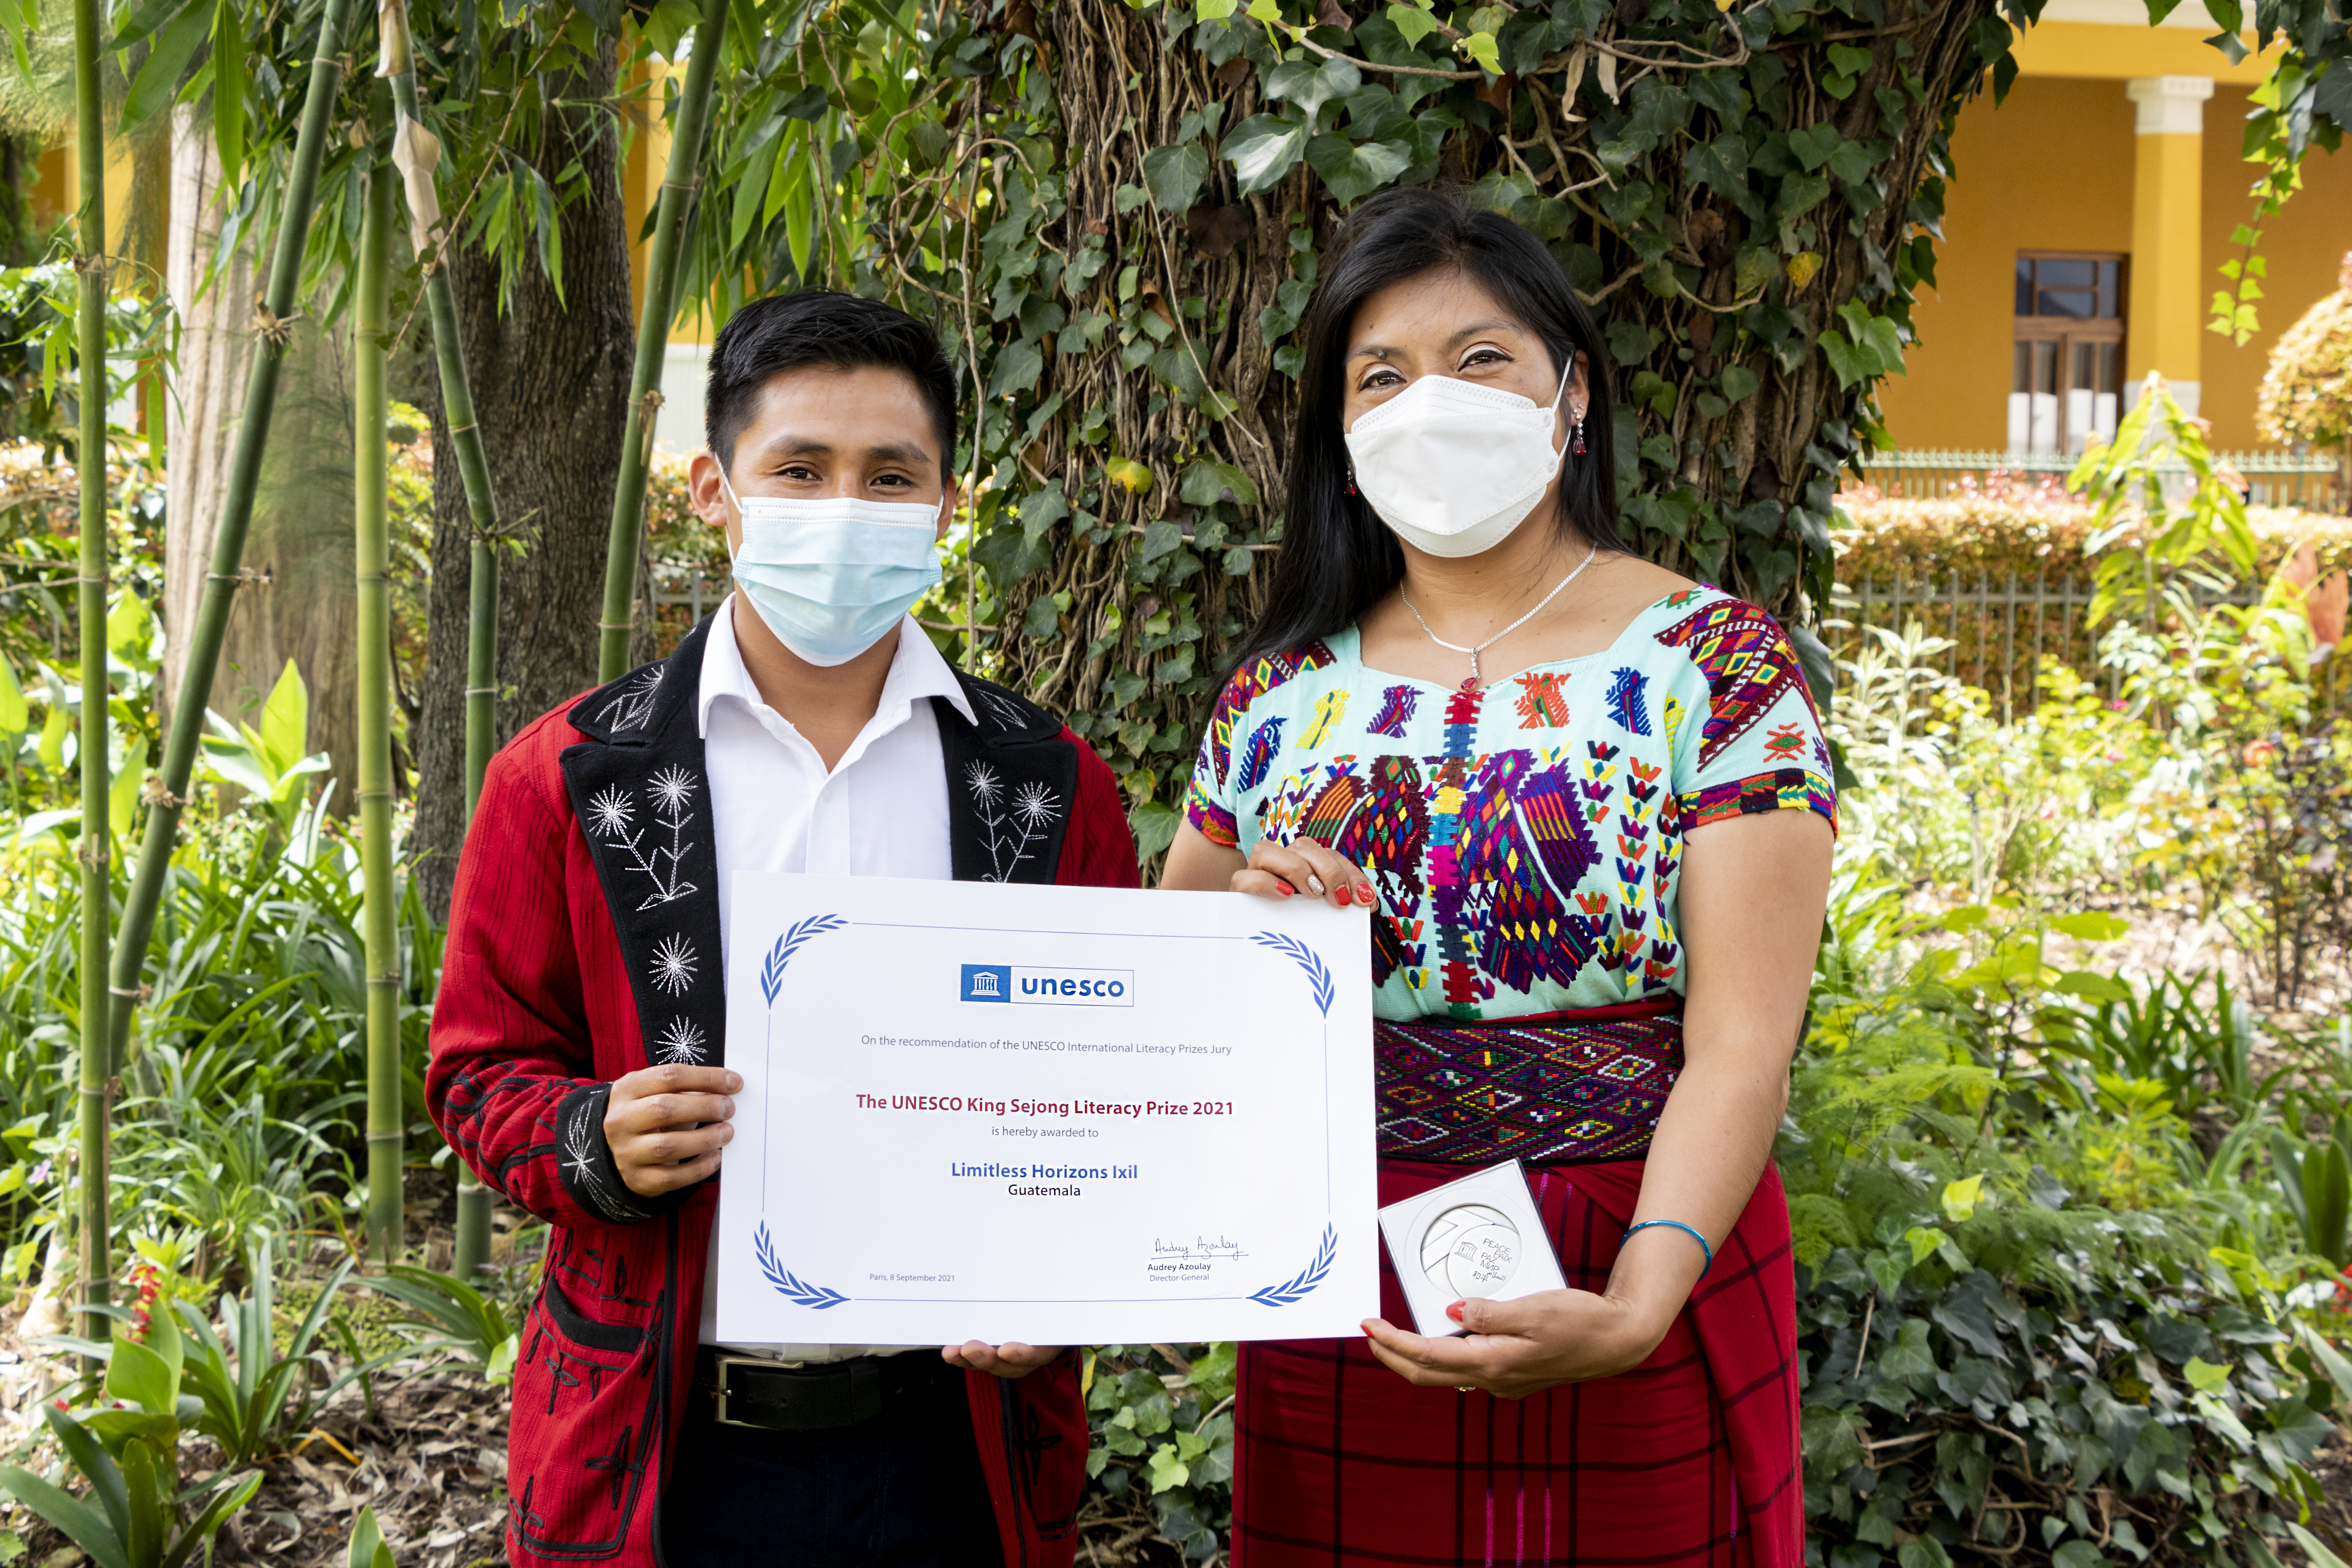 Limitless Horizons Ixil Awarded the 2021 UNESCO Literacy Prize